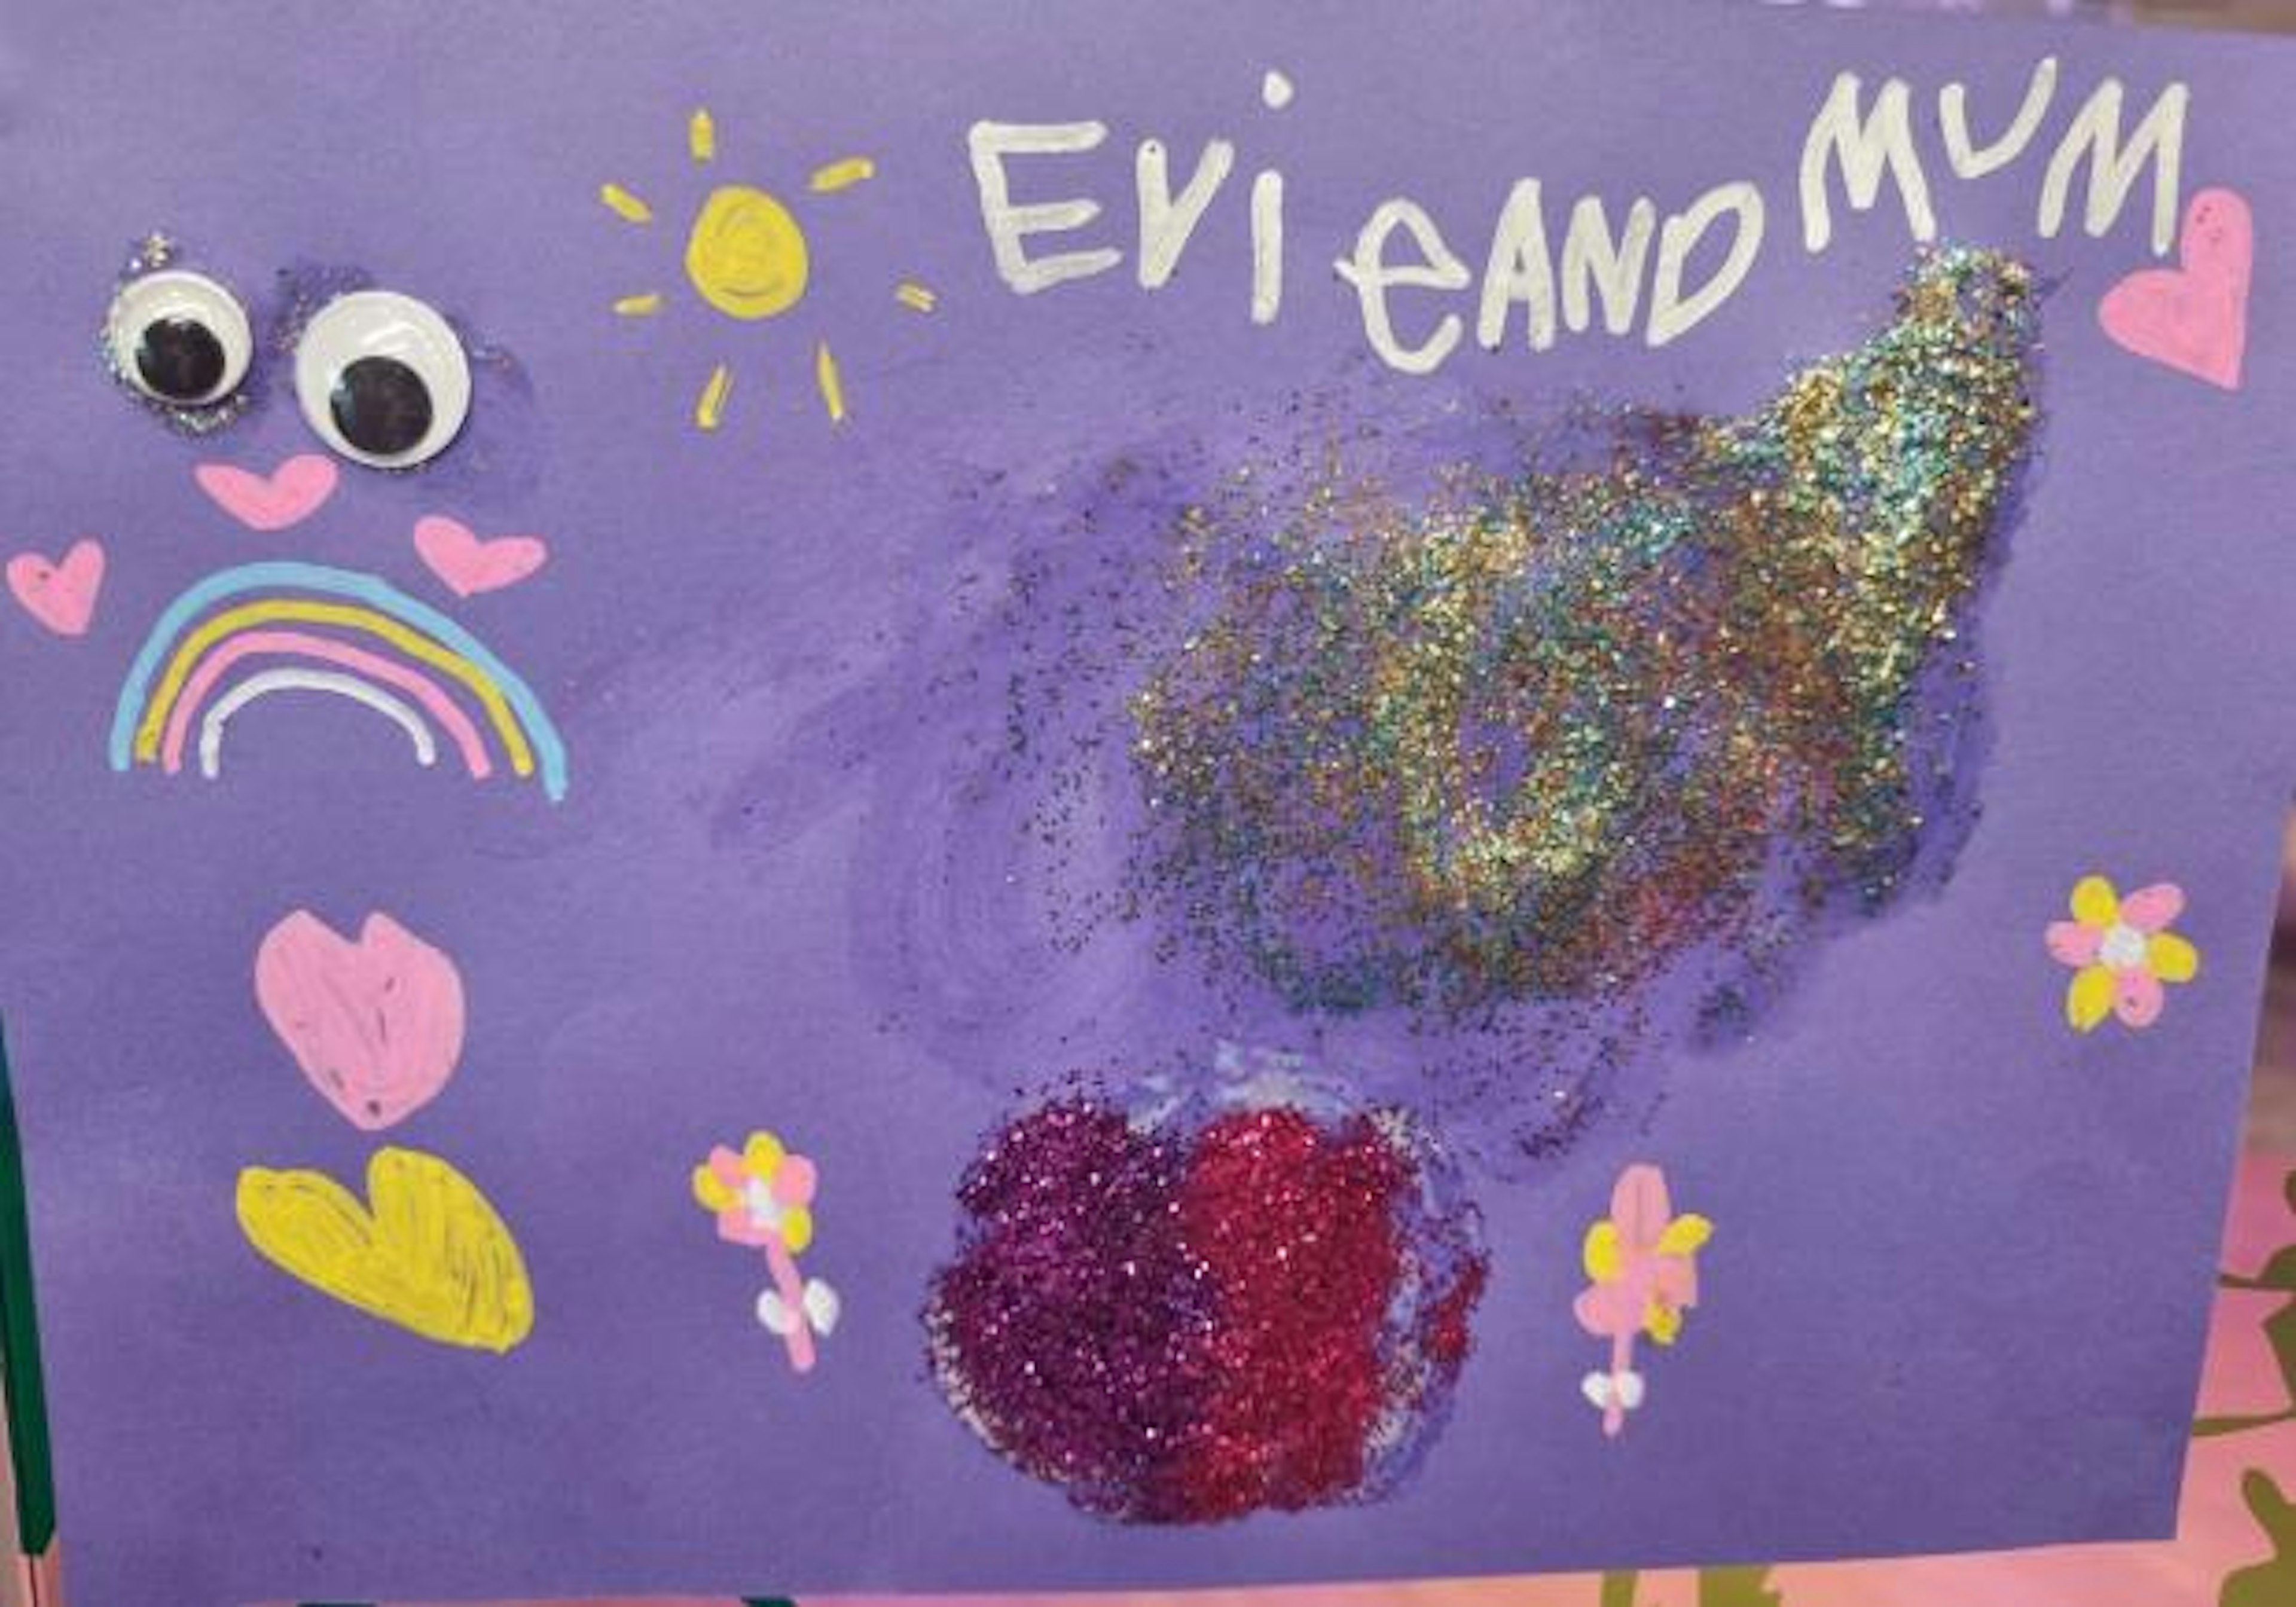 Sparkles, rainbow, love hearts and flowers. Purple,pink, gold and green glitter